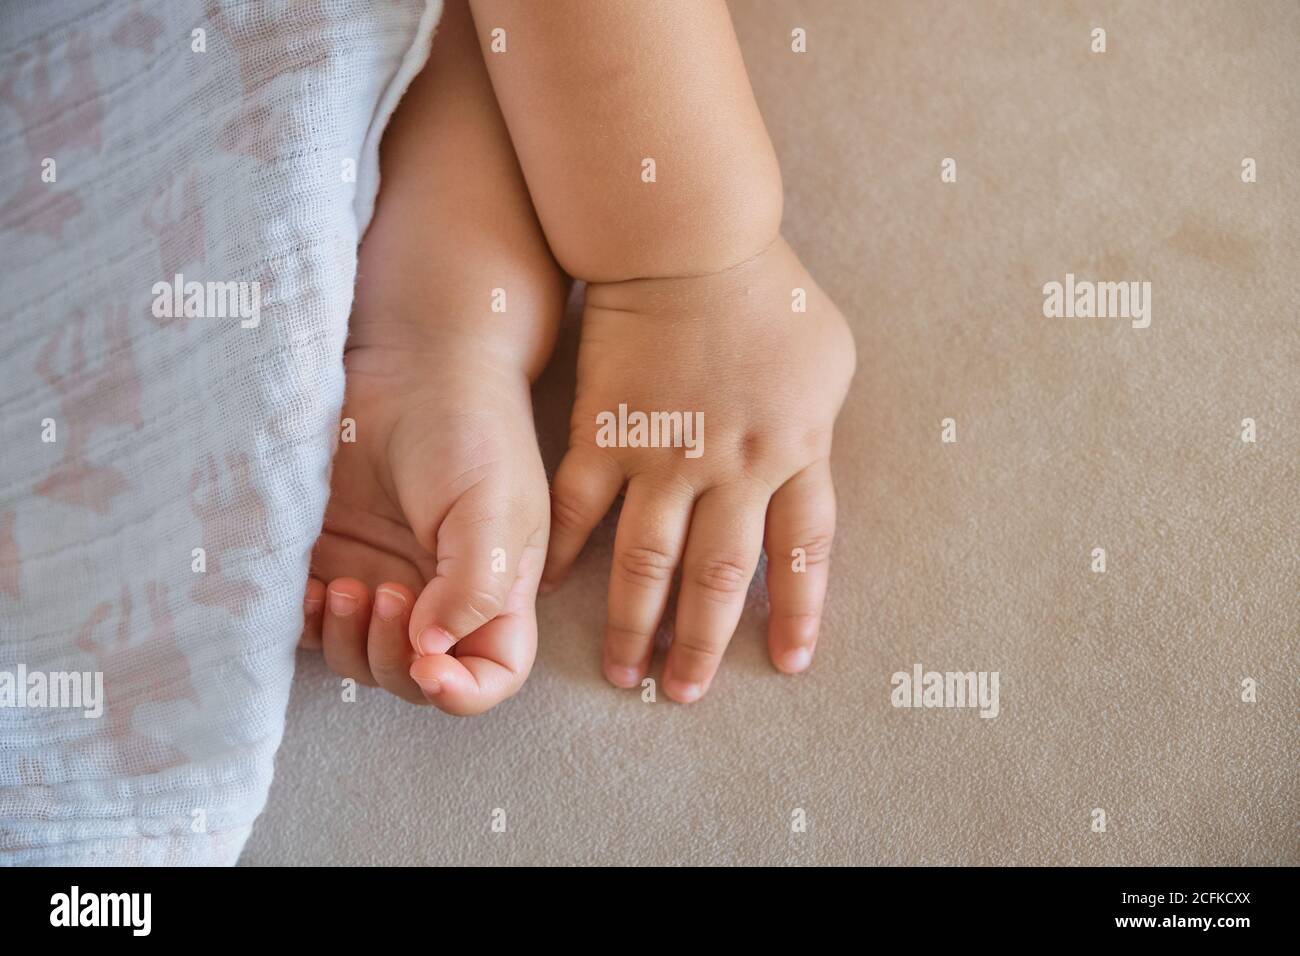 Cropped detail of cute baby's hands covered by a blanket lying on a sofa Stock Photo